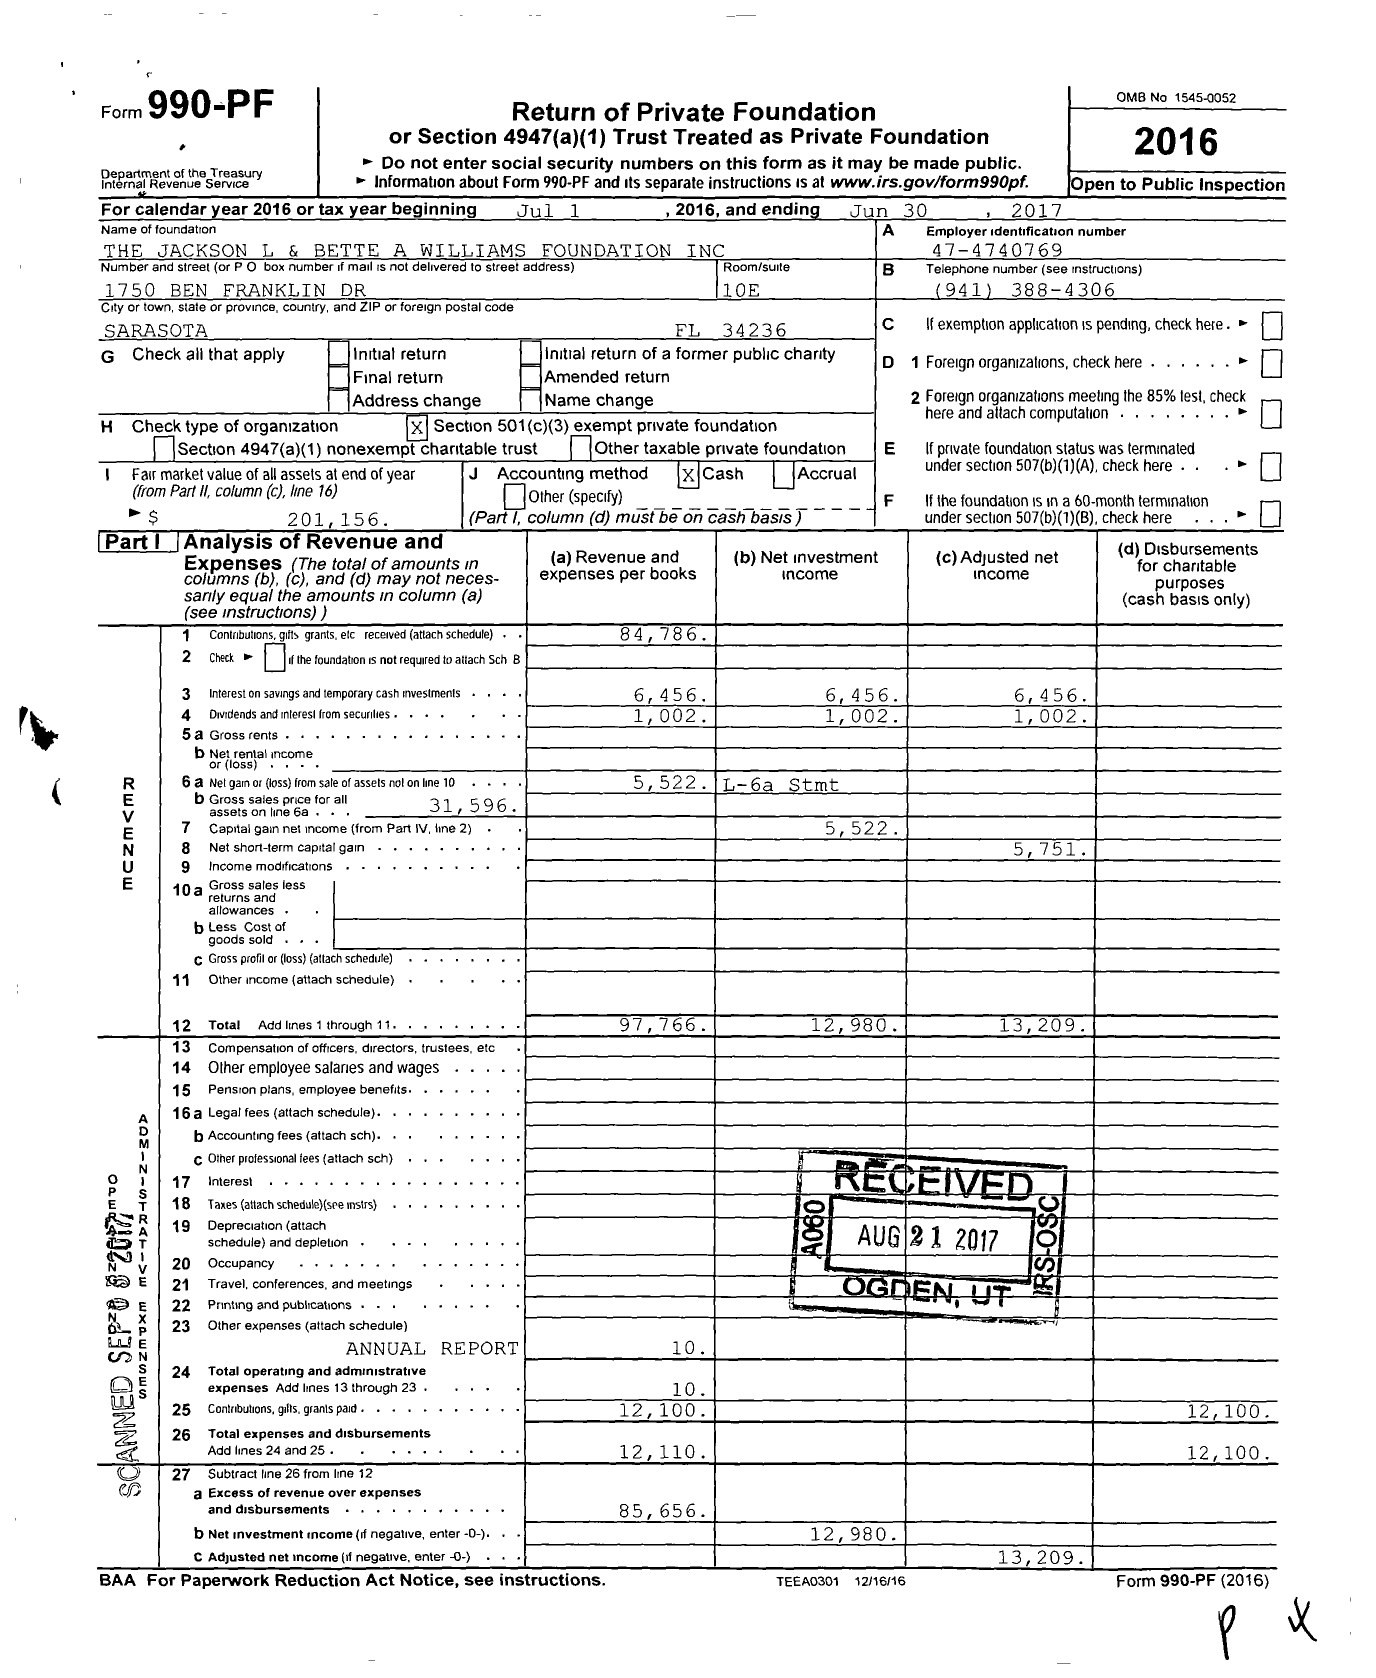 Image of first page of 2016 Form 990PF for The Jackson L and Bette A Williams Foundation